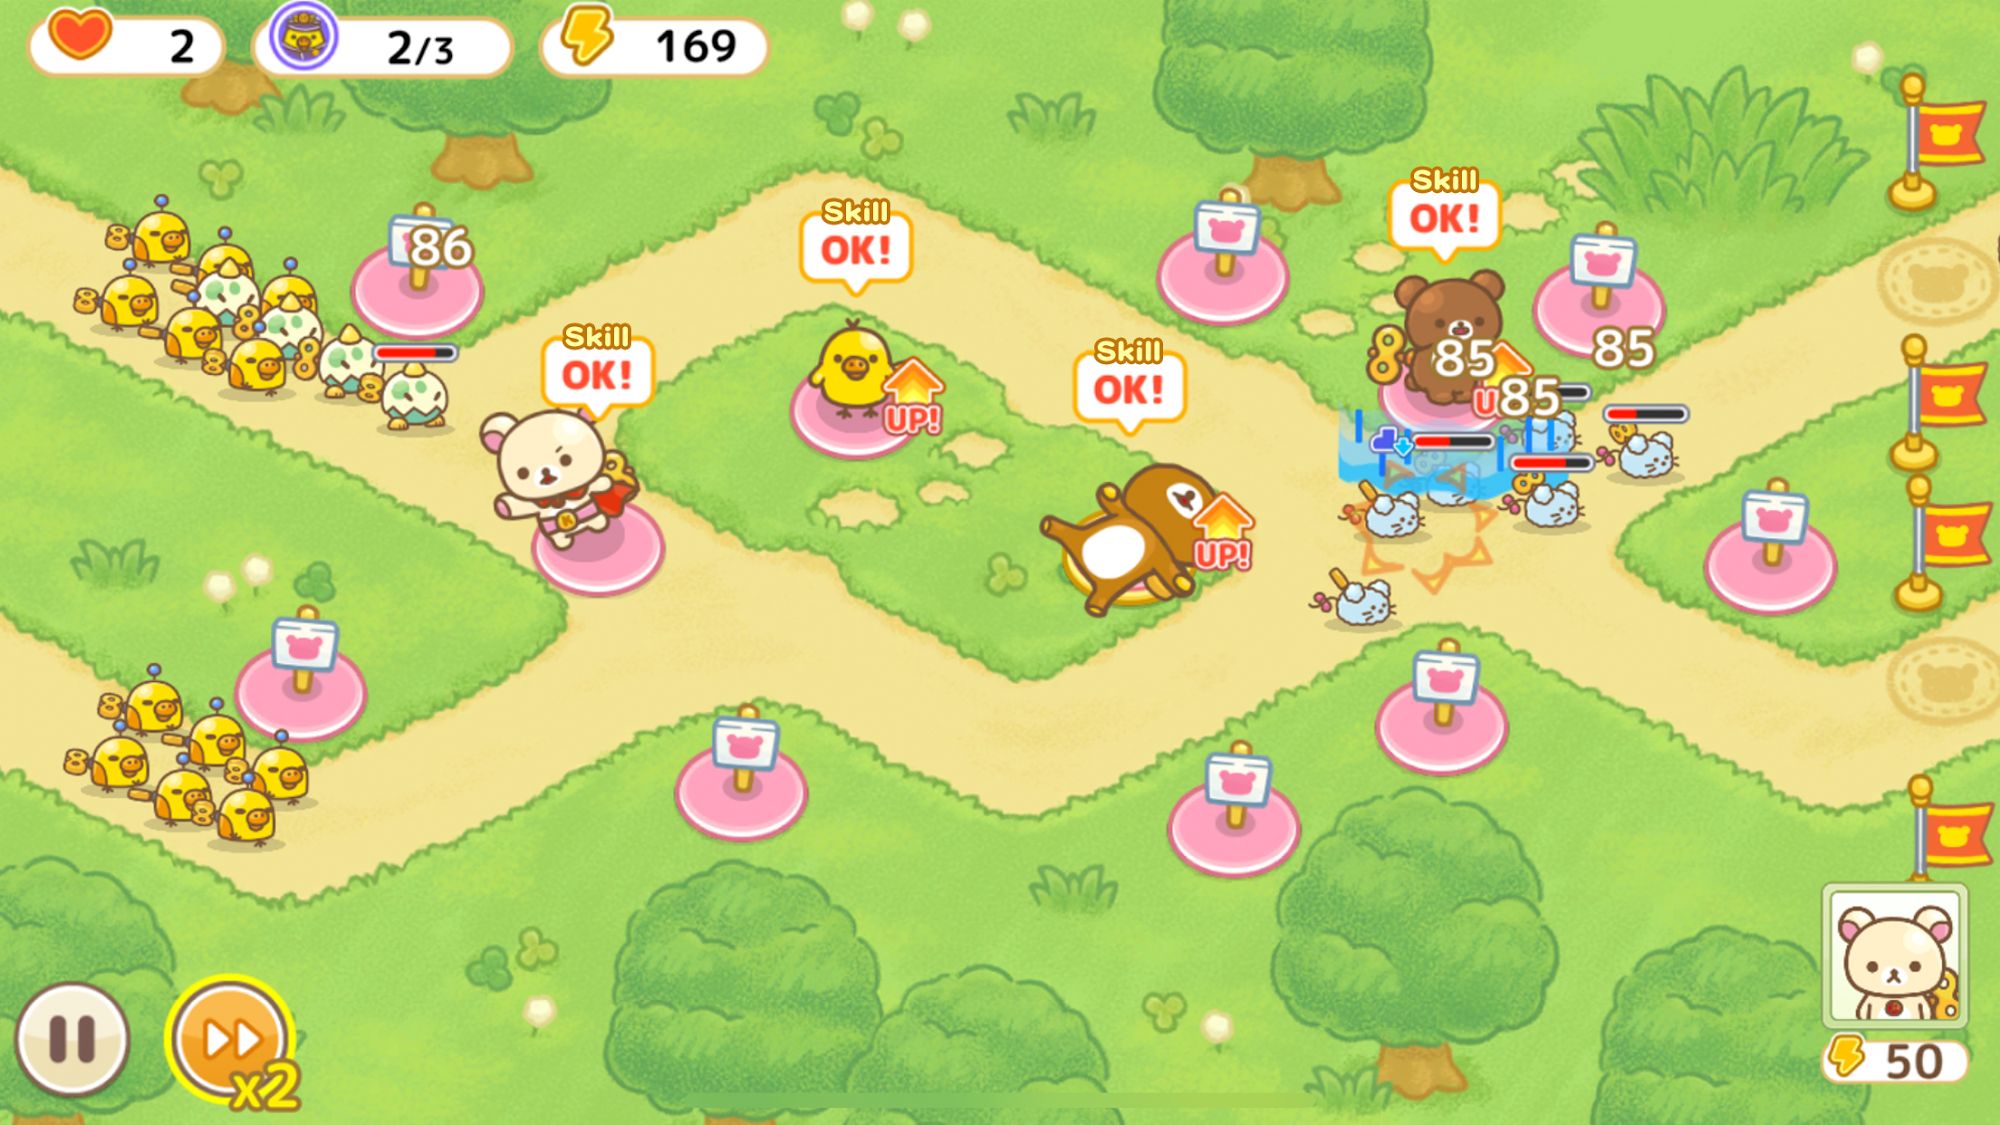 Gameplay of the Korilakkuma Tower Defense for Android phone or tablet.